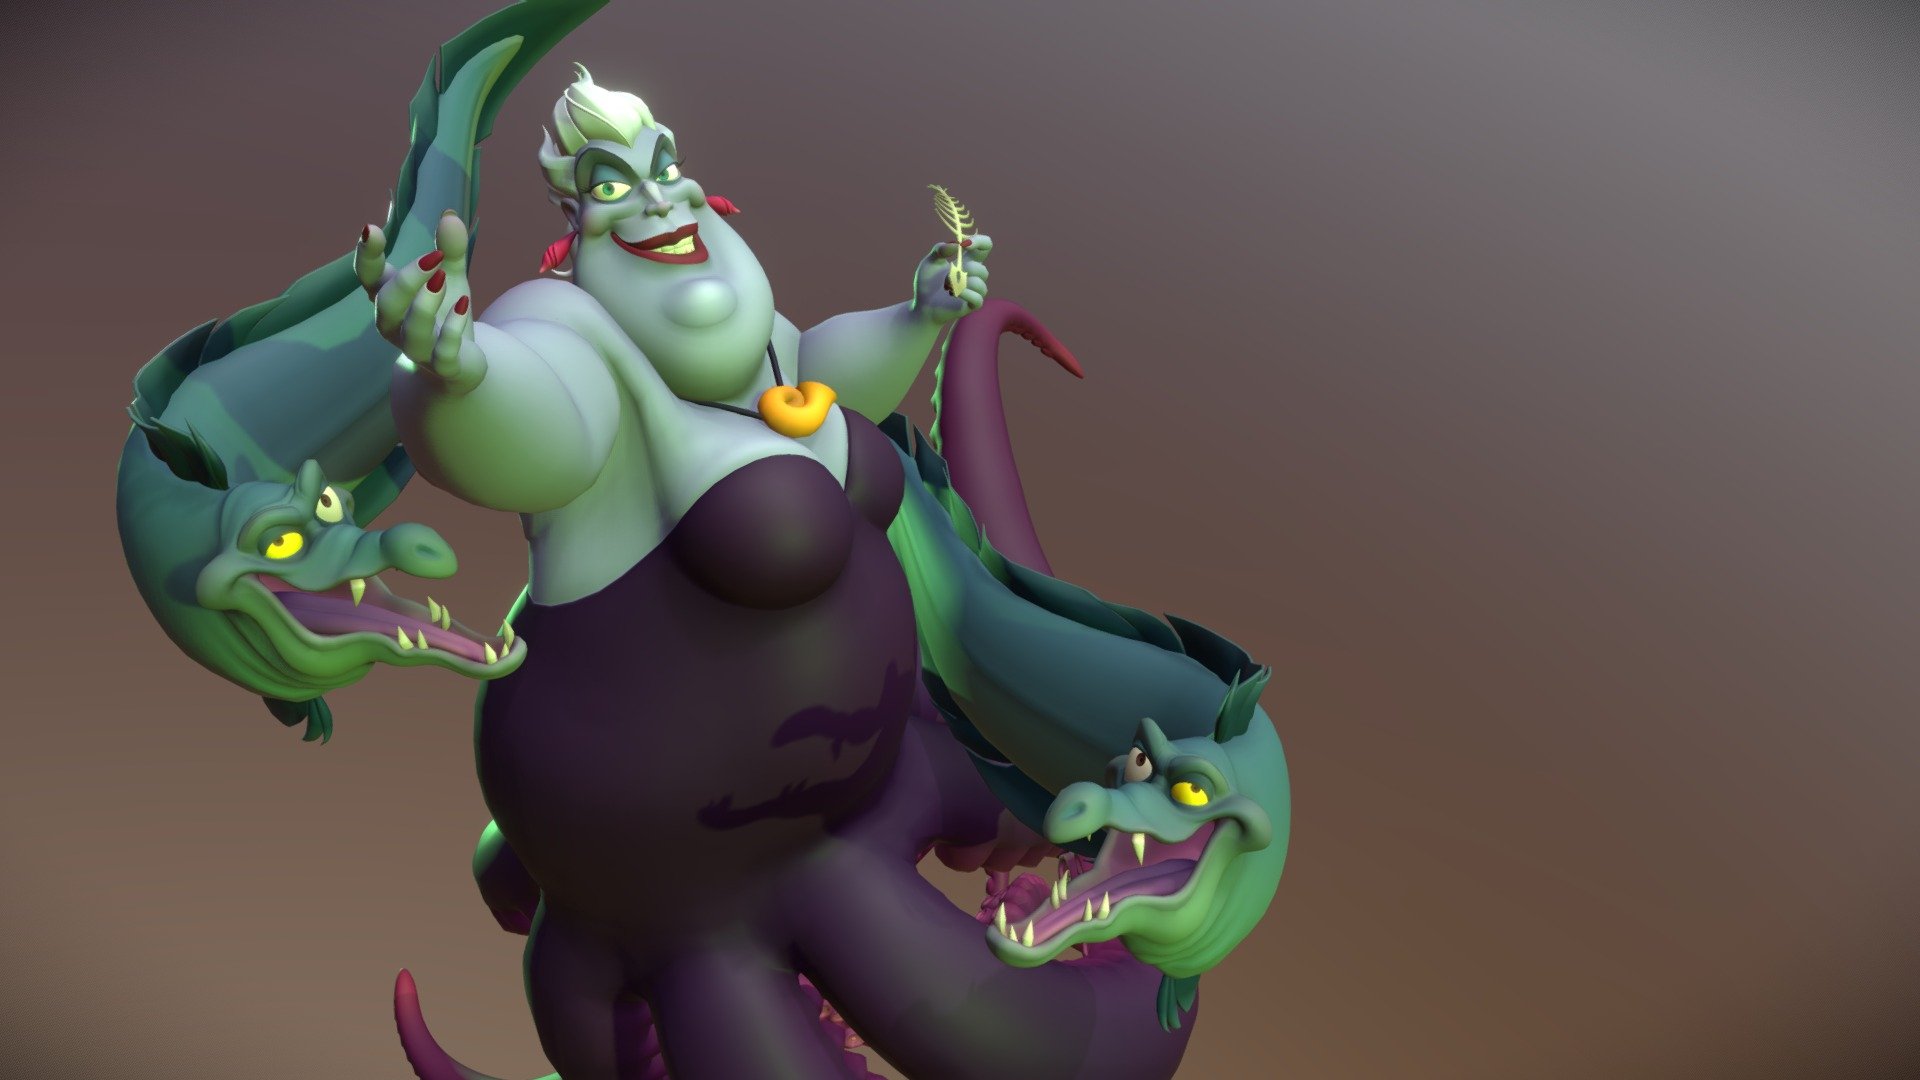 I really love modeling cartoon characters. 
This time I chose Ursula and her morays, from the Disney movie &ldquo;The Little Mermaid